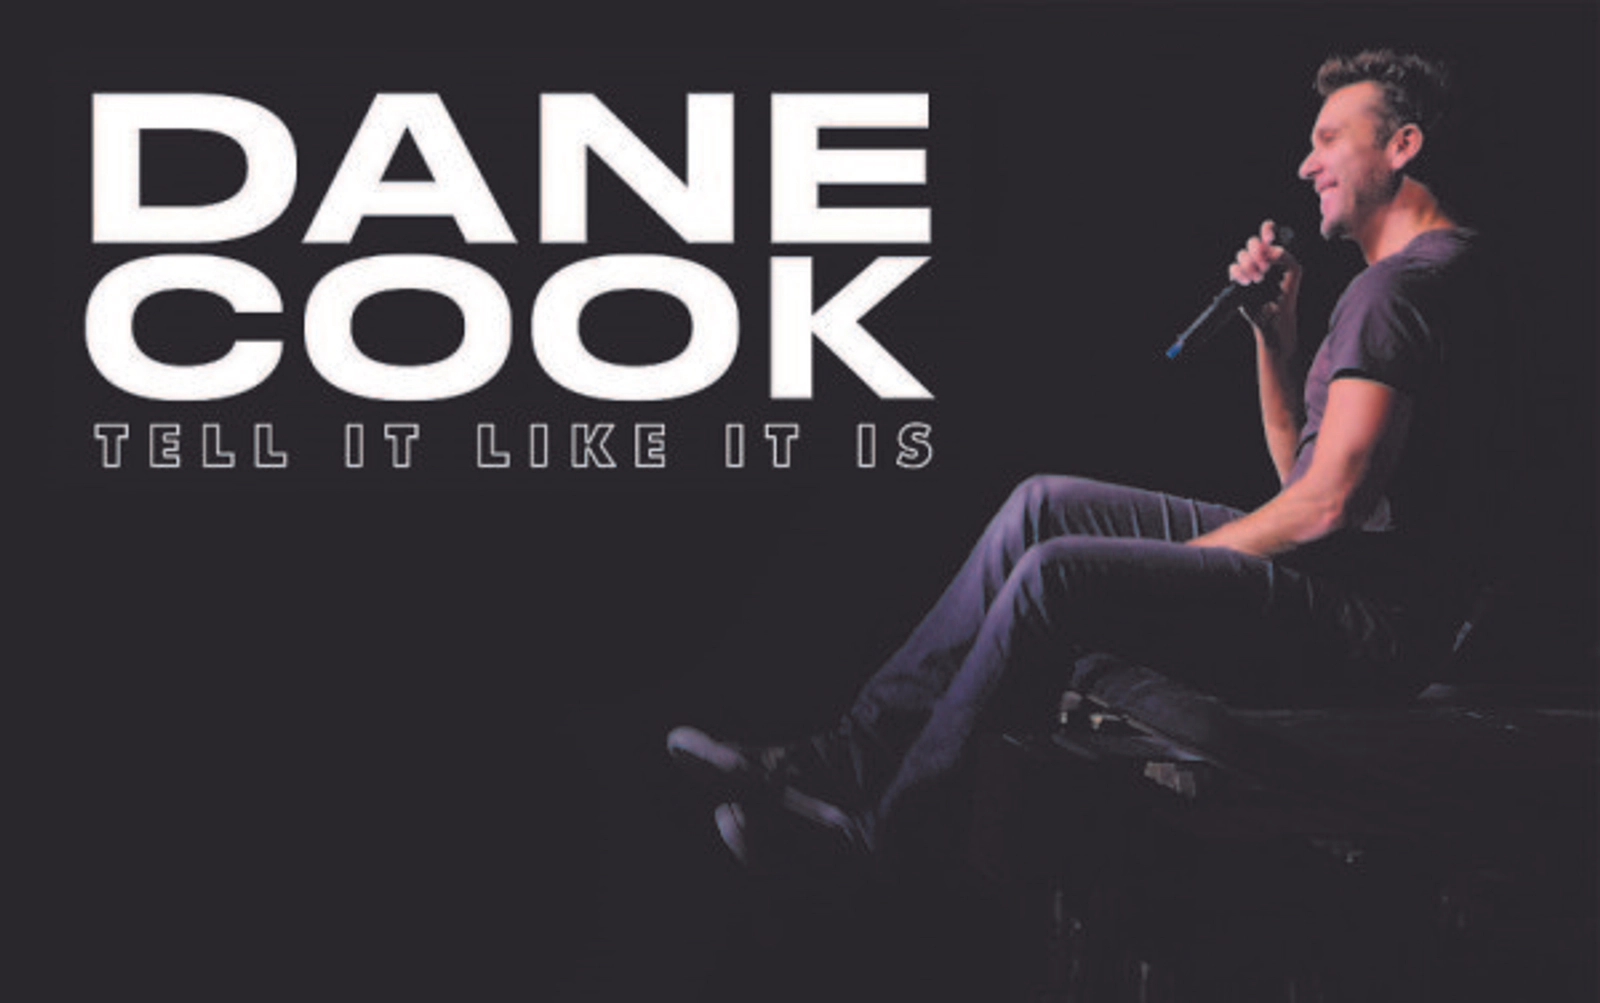 DANE COOK TICKETS! - Thumbnail Image